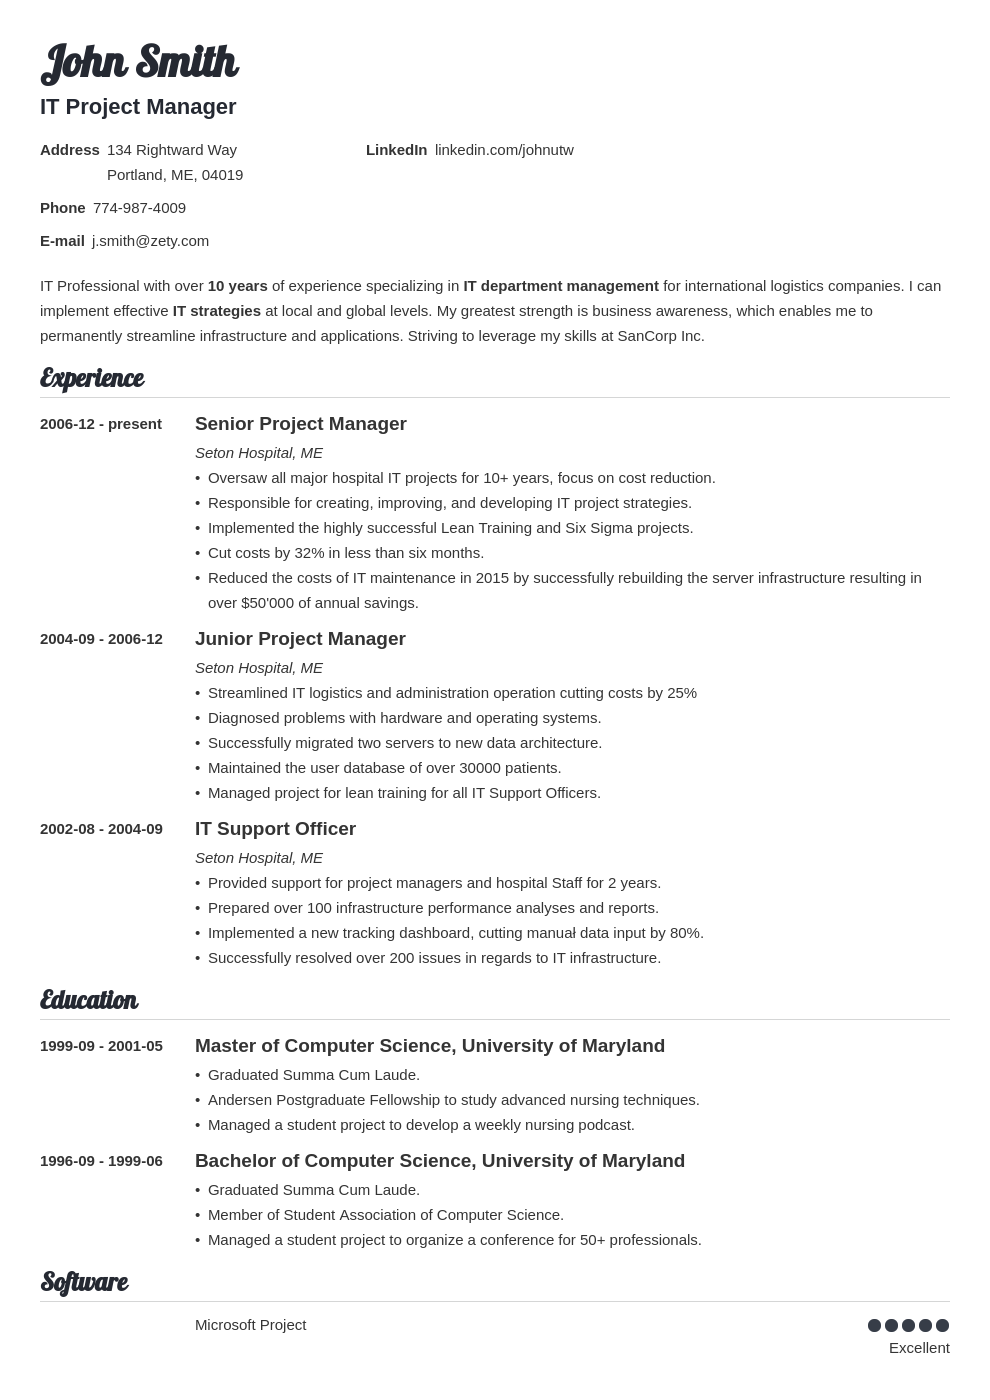 Resume template word purchase